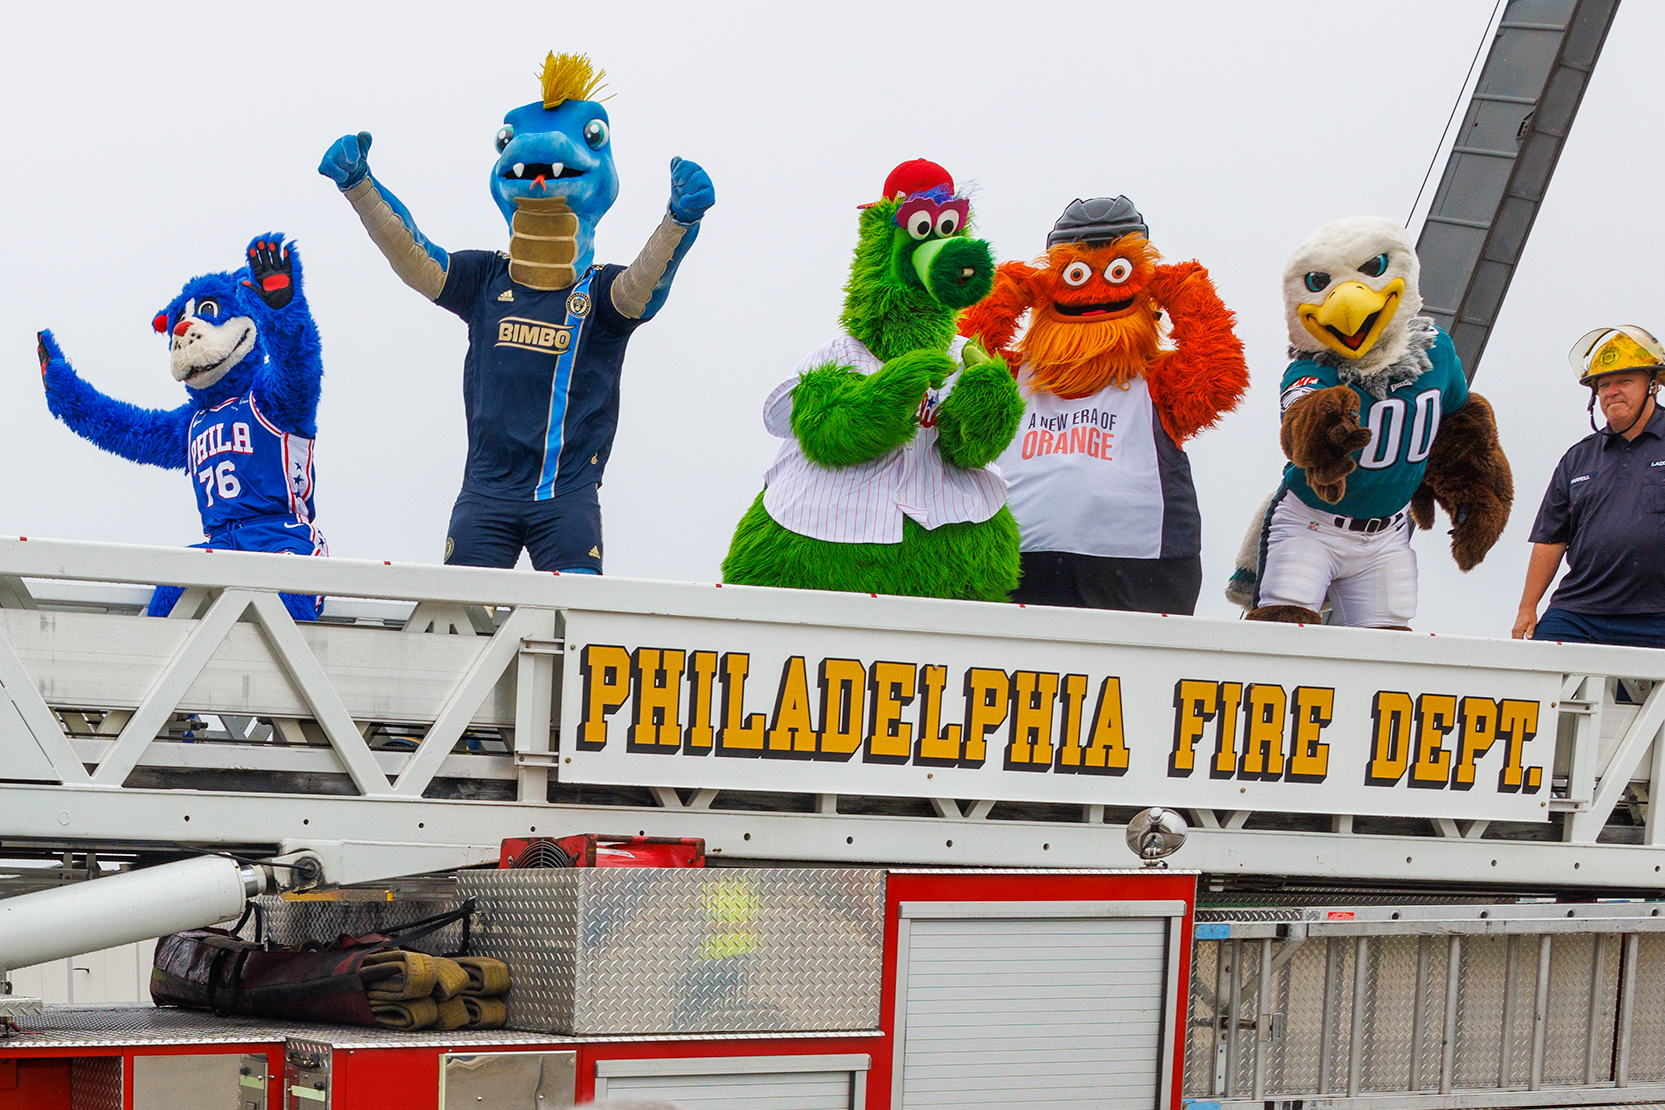 Philly's mascots helped reopen I-95. Yes, our city is a real place